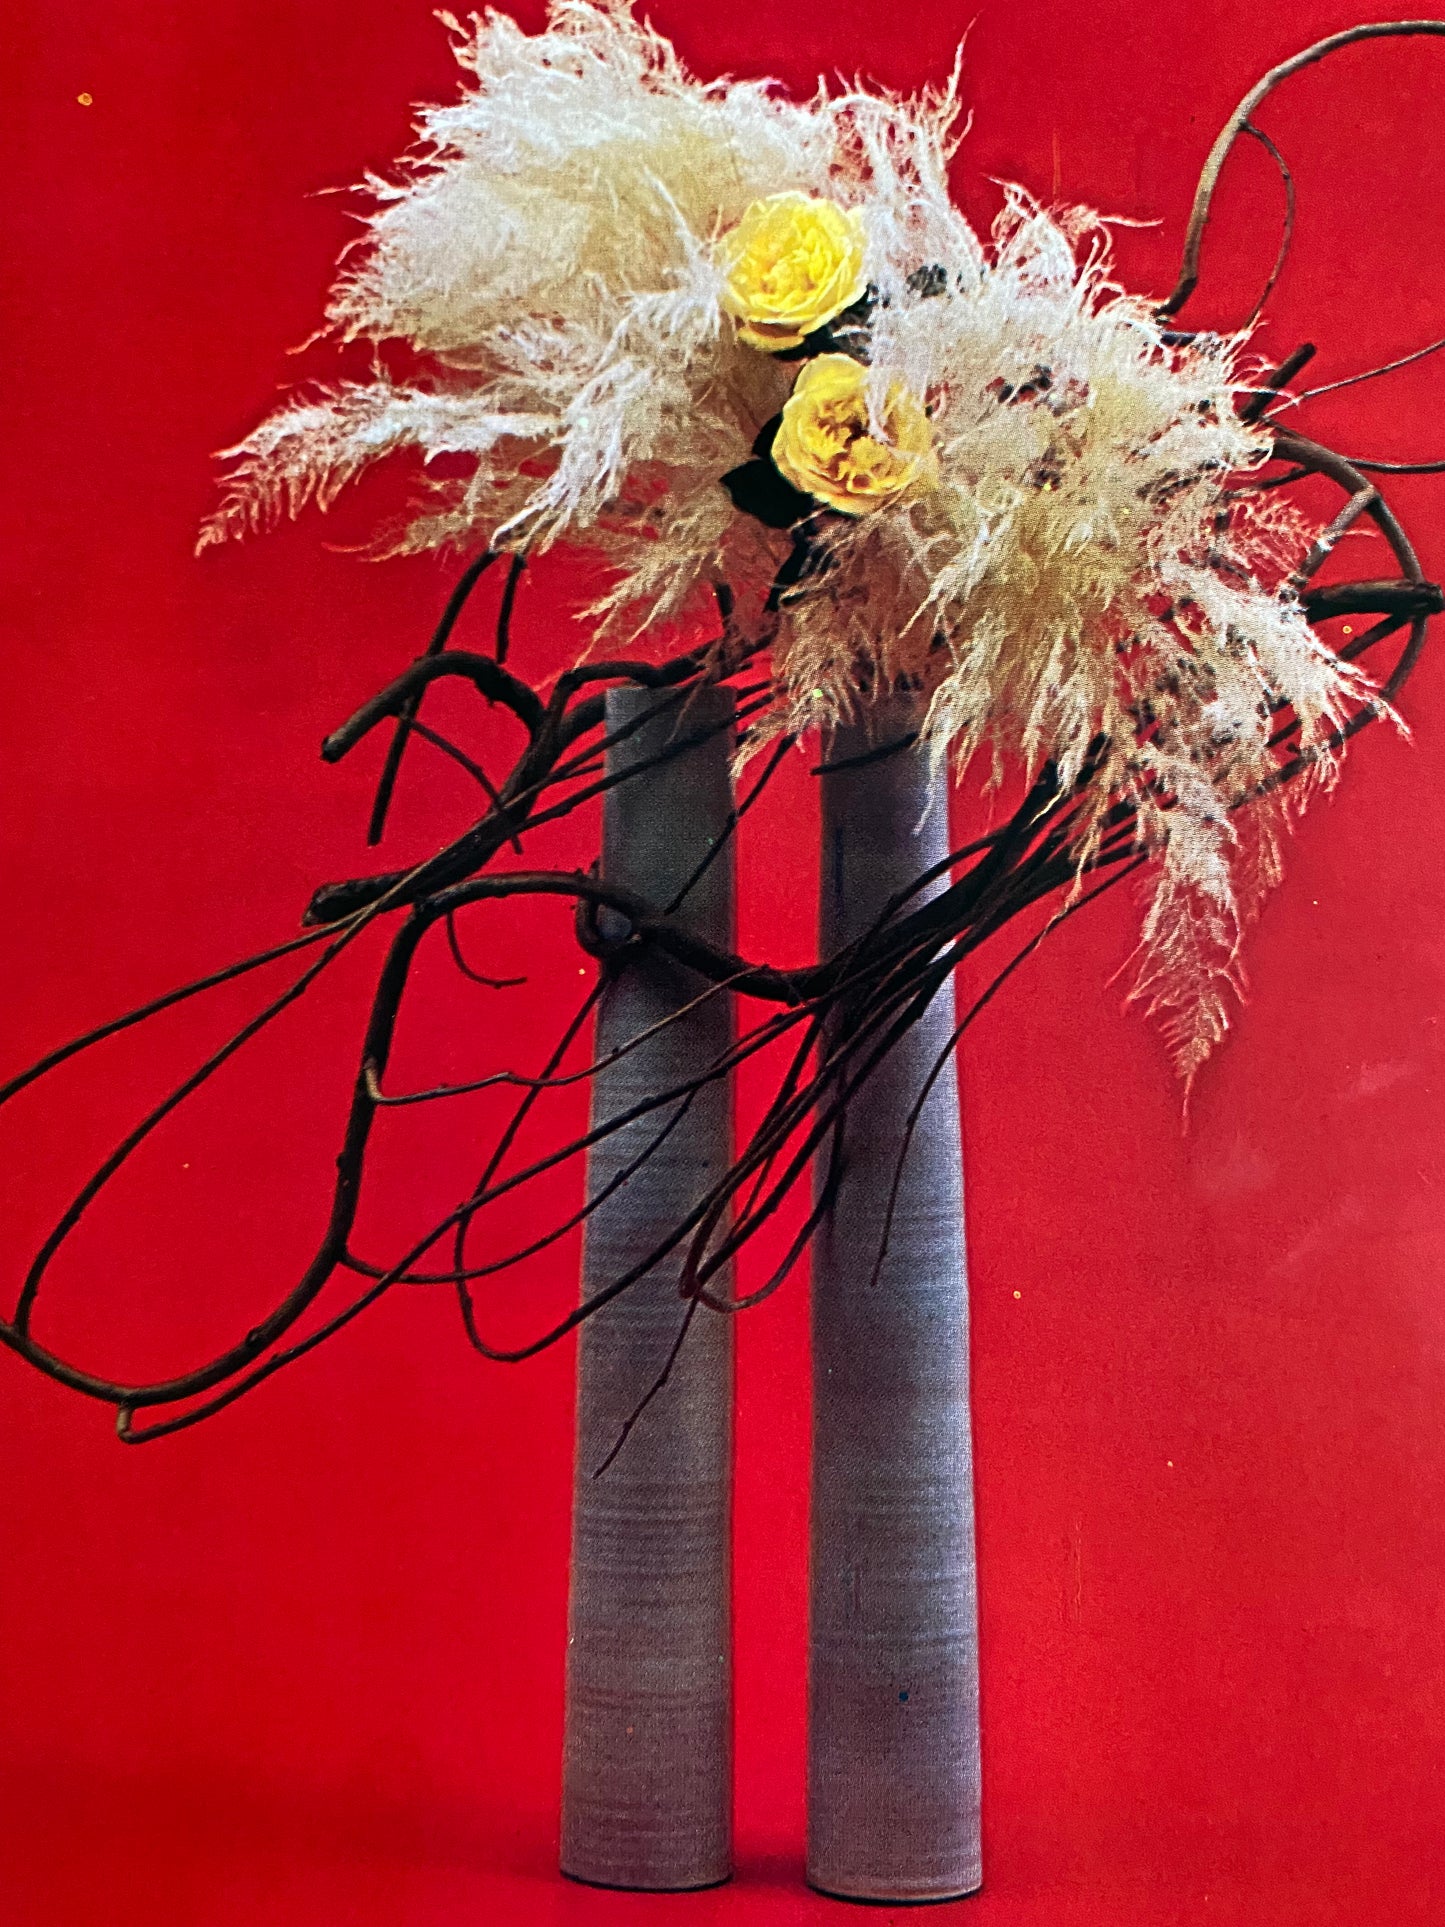 A Guide To Japanese Flower Arrangement (1969)